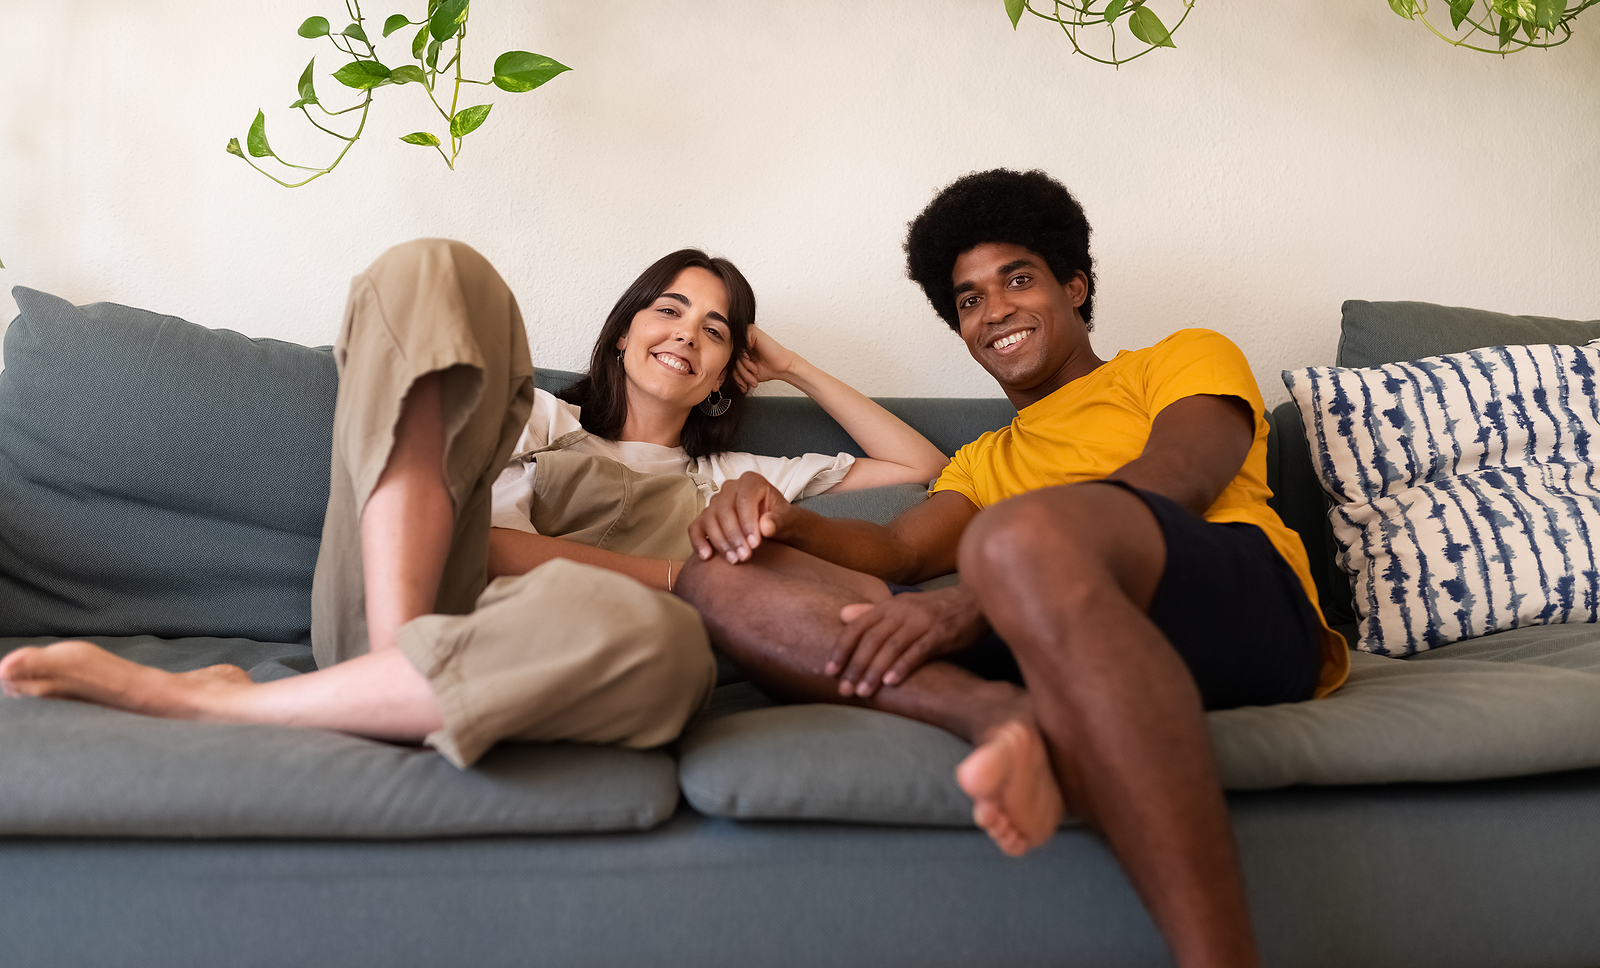 Smiling young interracial couple relaxing on the couch looking at camera.